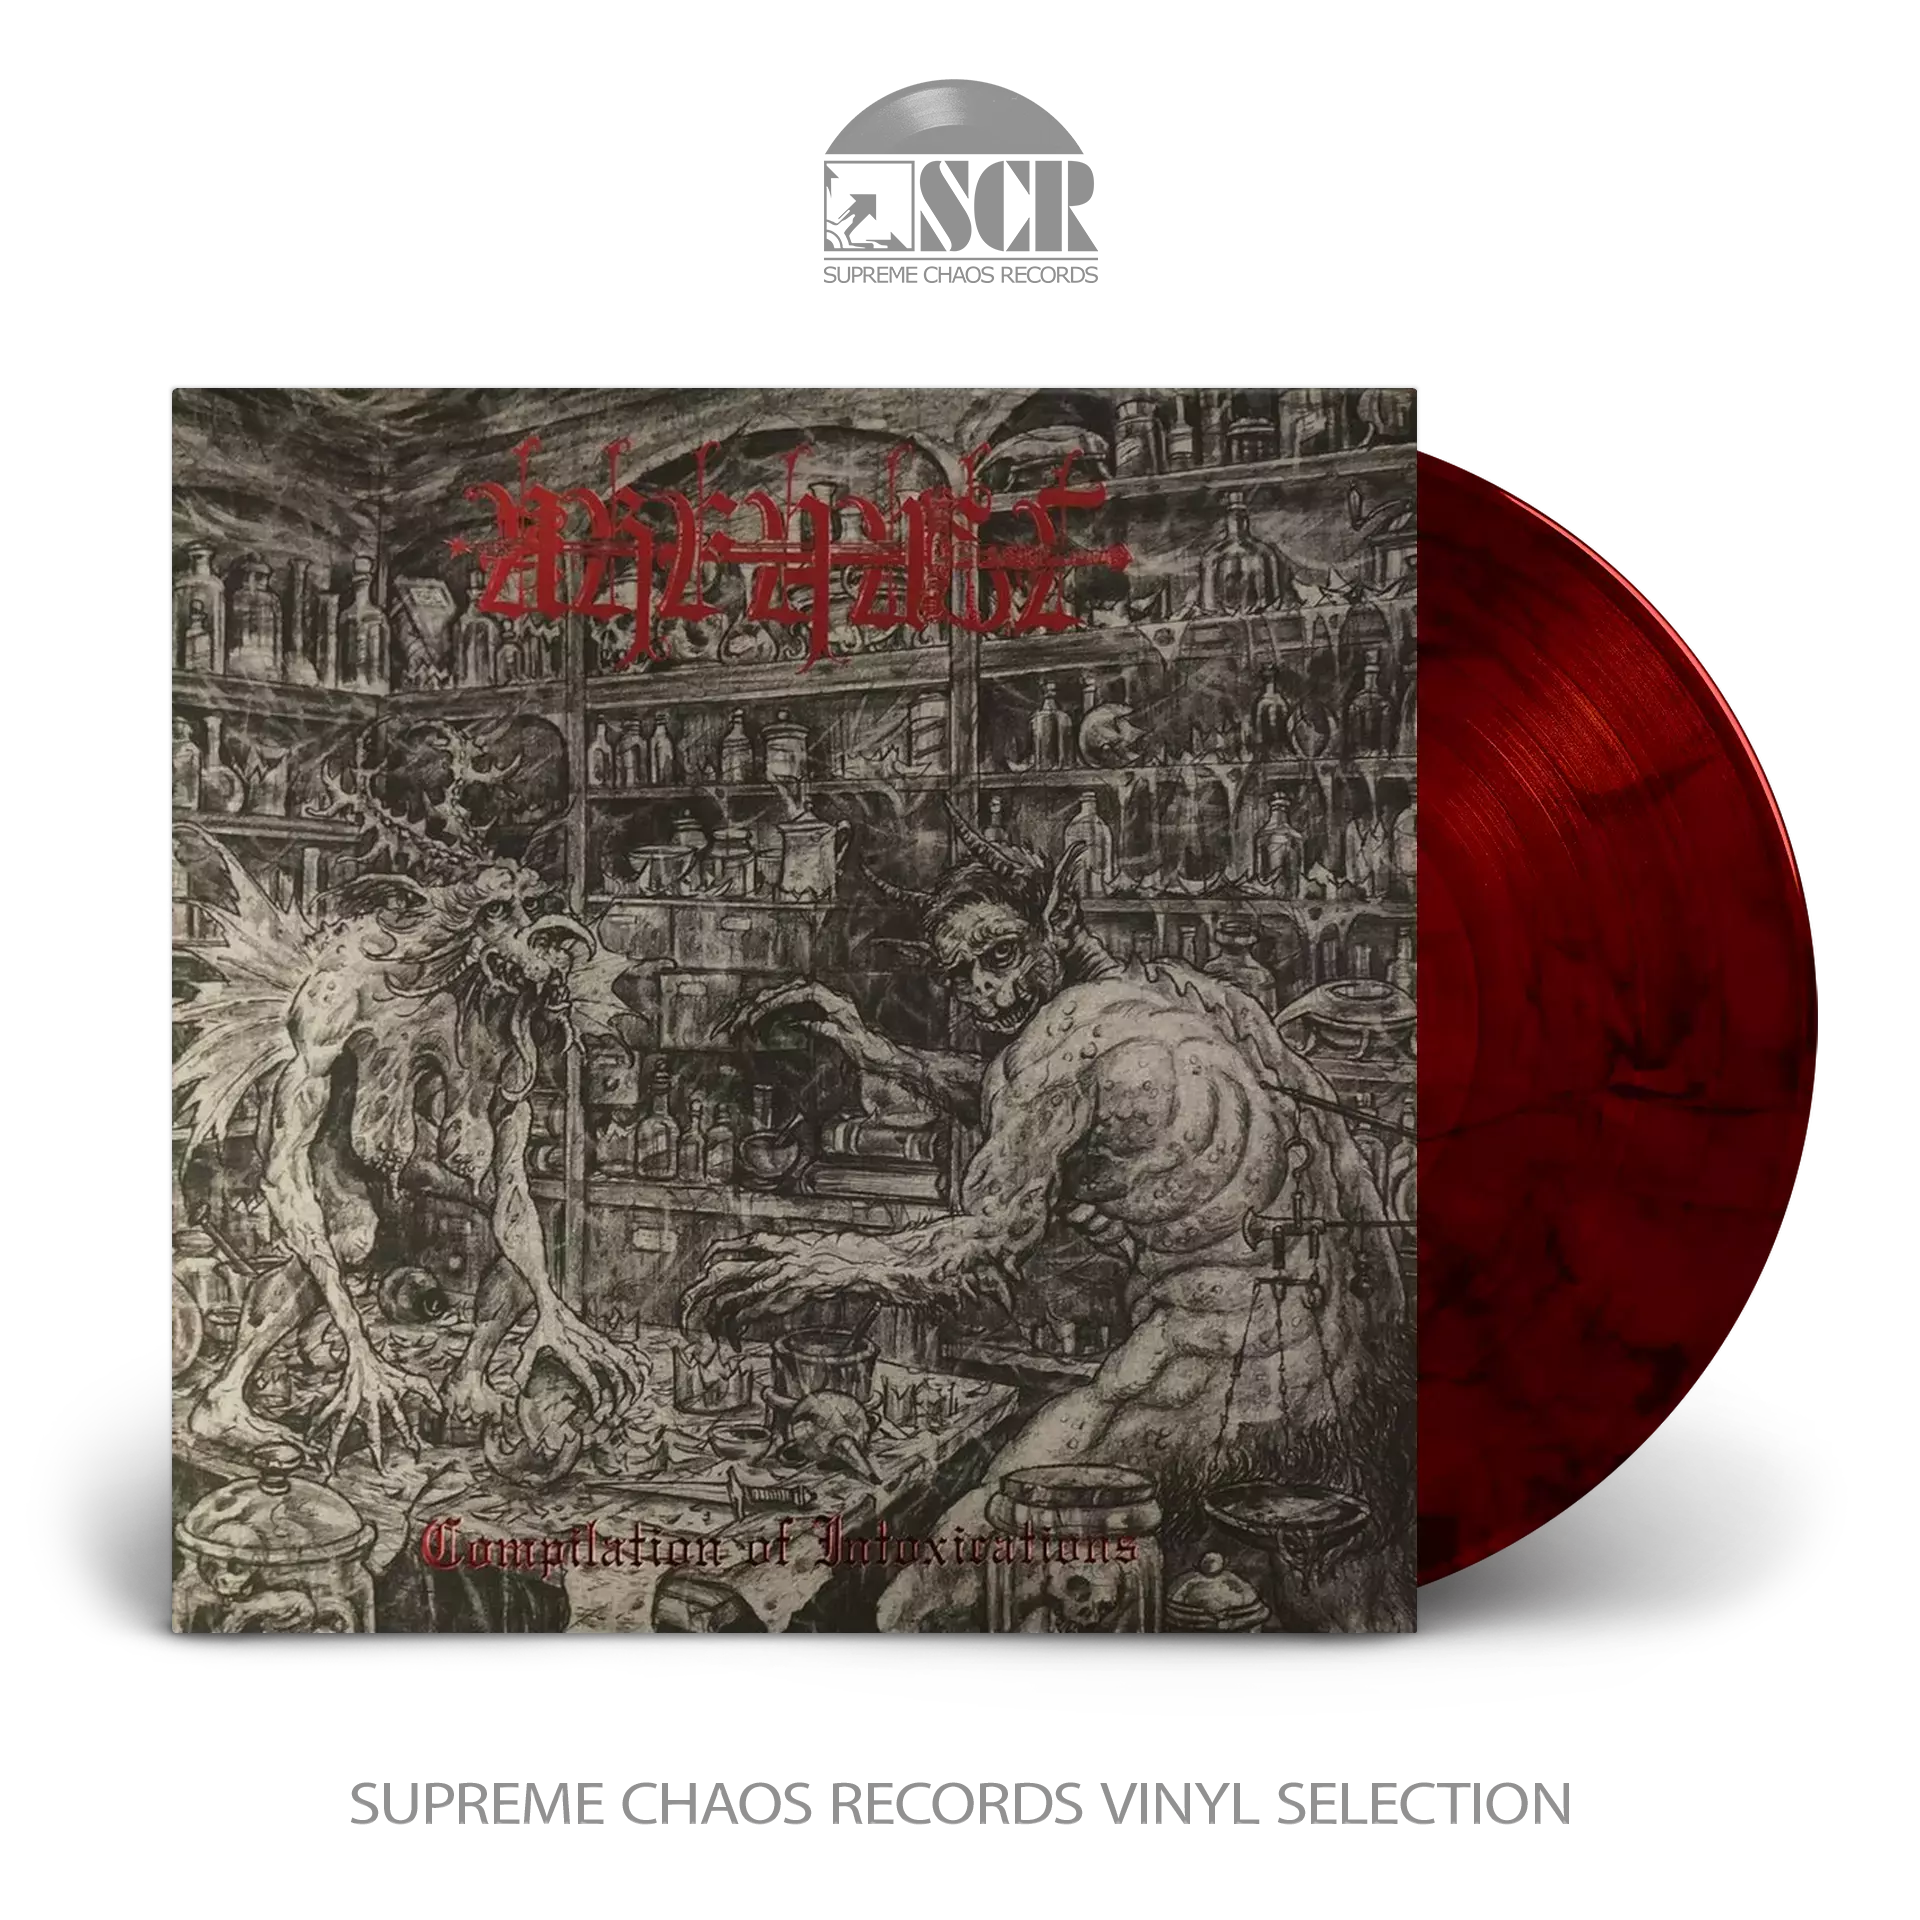 URFAUST - Compilation Of Intoxications [DARK RED LP]